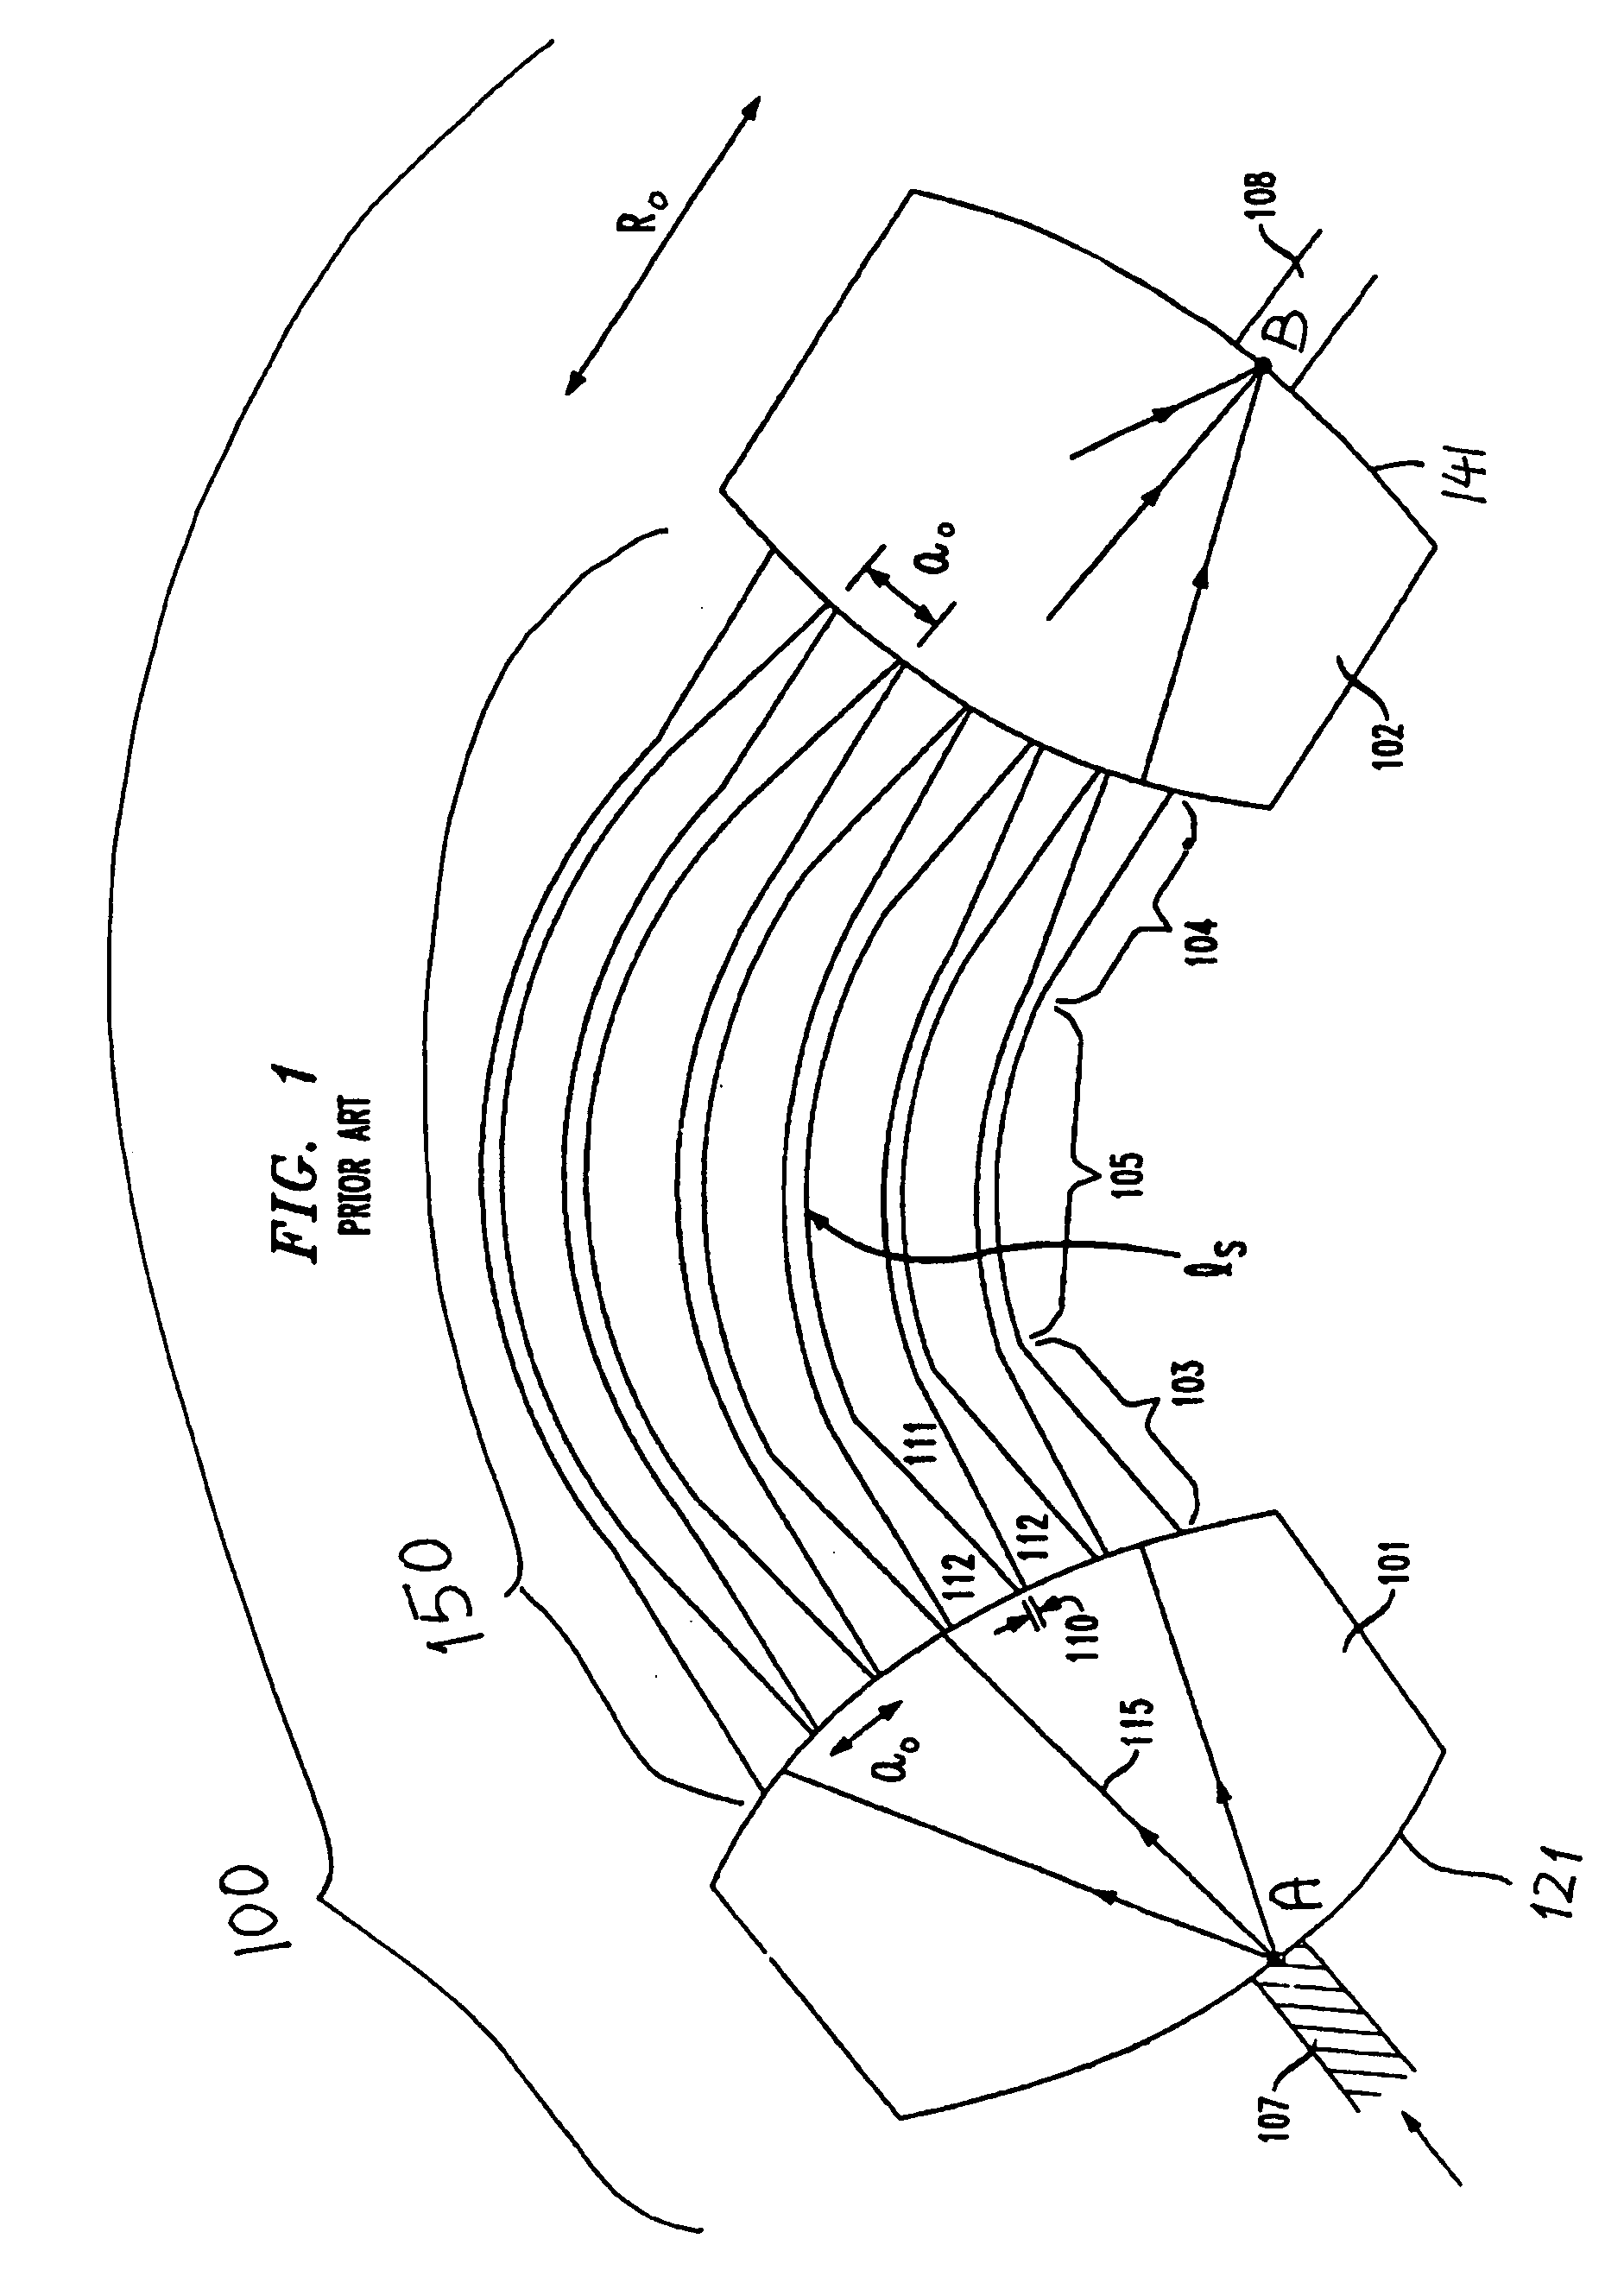 Efficient waveguide arrays with optimized matching transitions